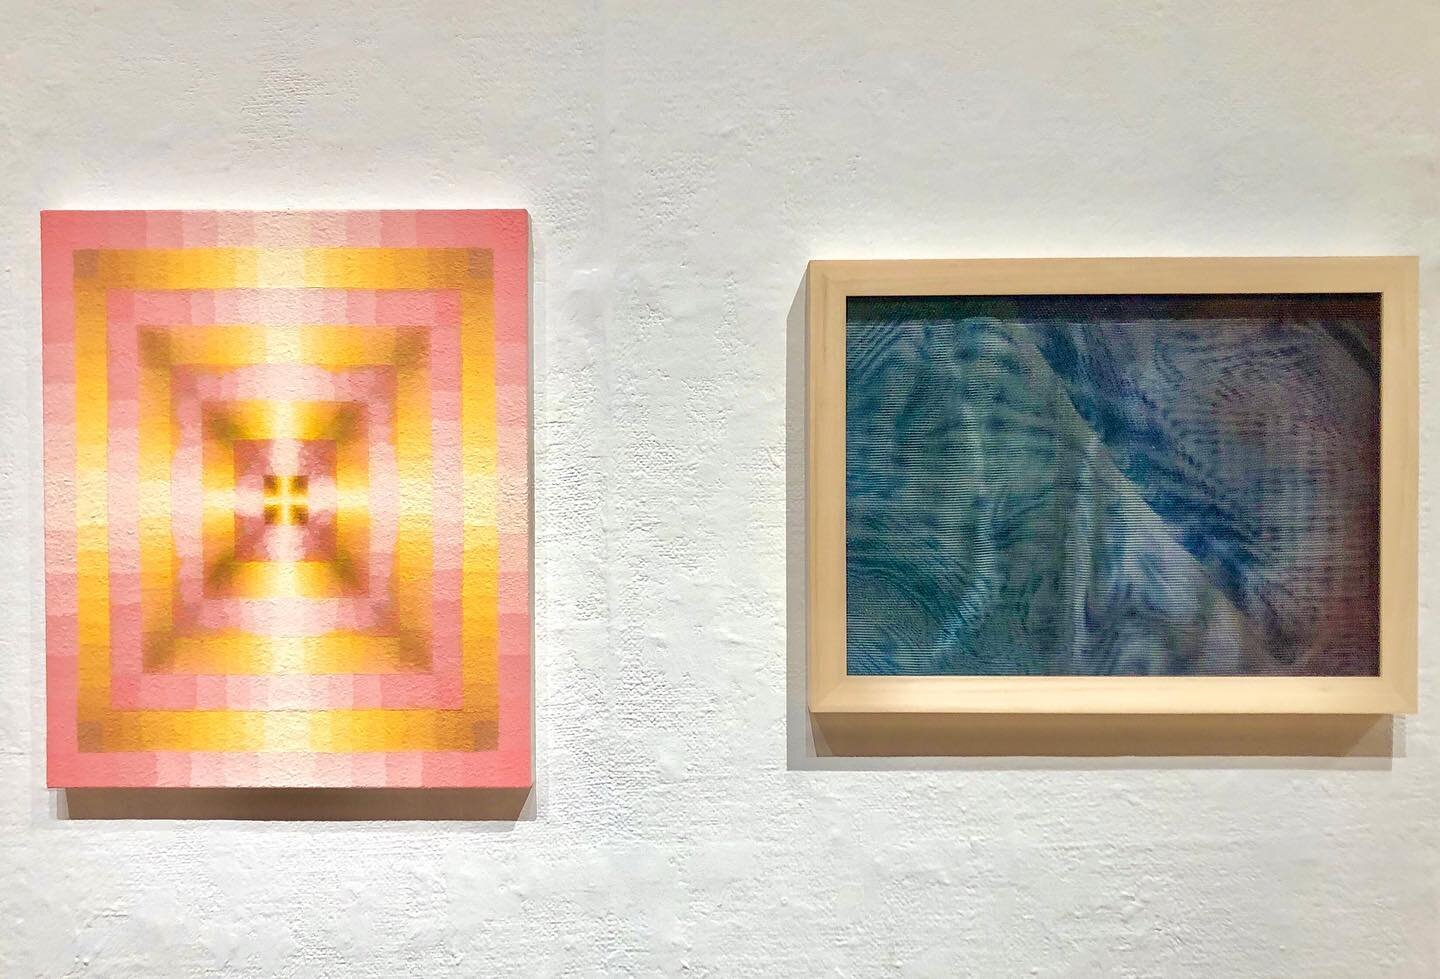 Last few days to see these two pieces in Excursions @berkeleyartcenter curated by @hoi9__9 &bull; show closes Saturday 7/29 at 5pm 

(L) No Star Burns Forever, paper pulp on canvas, 24&rdquo; x 20&rdquo;
 
(R) Peace, Love, and Monkey Business, screen